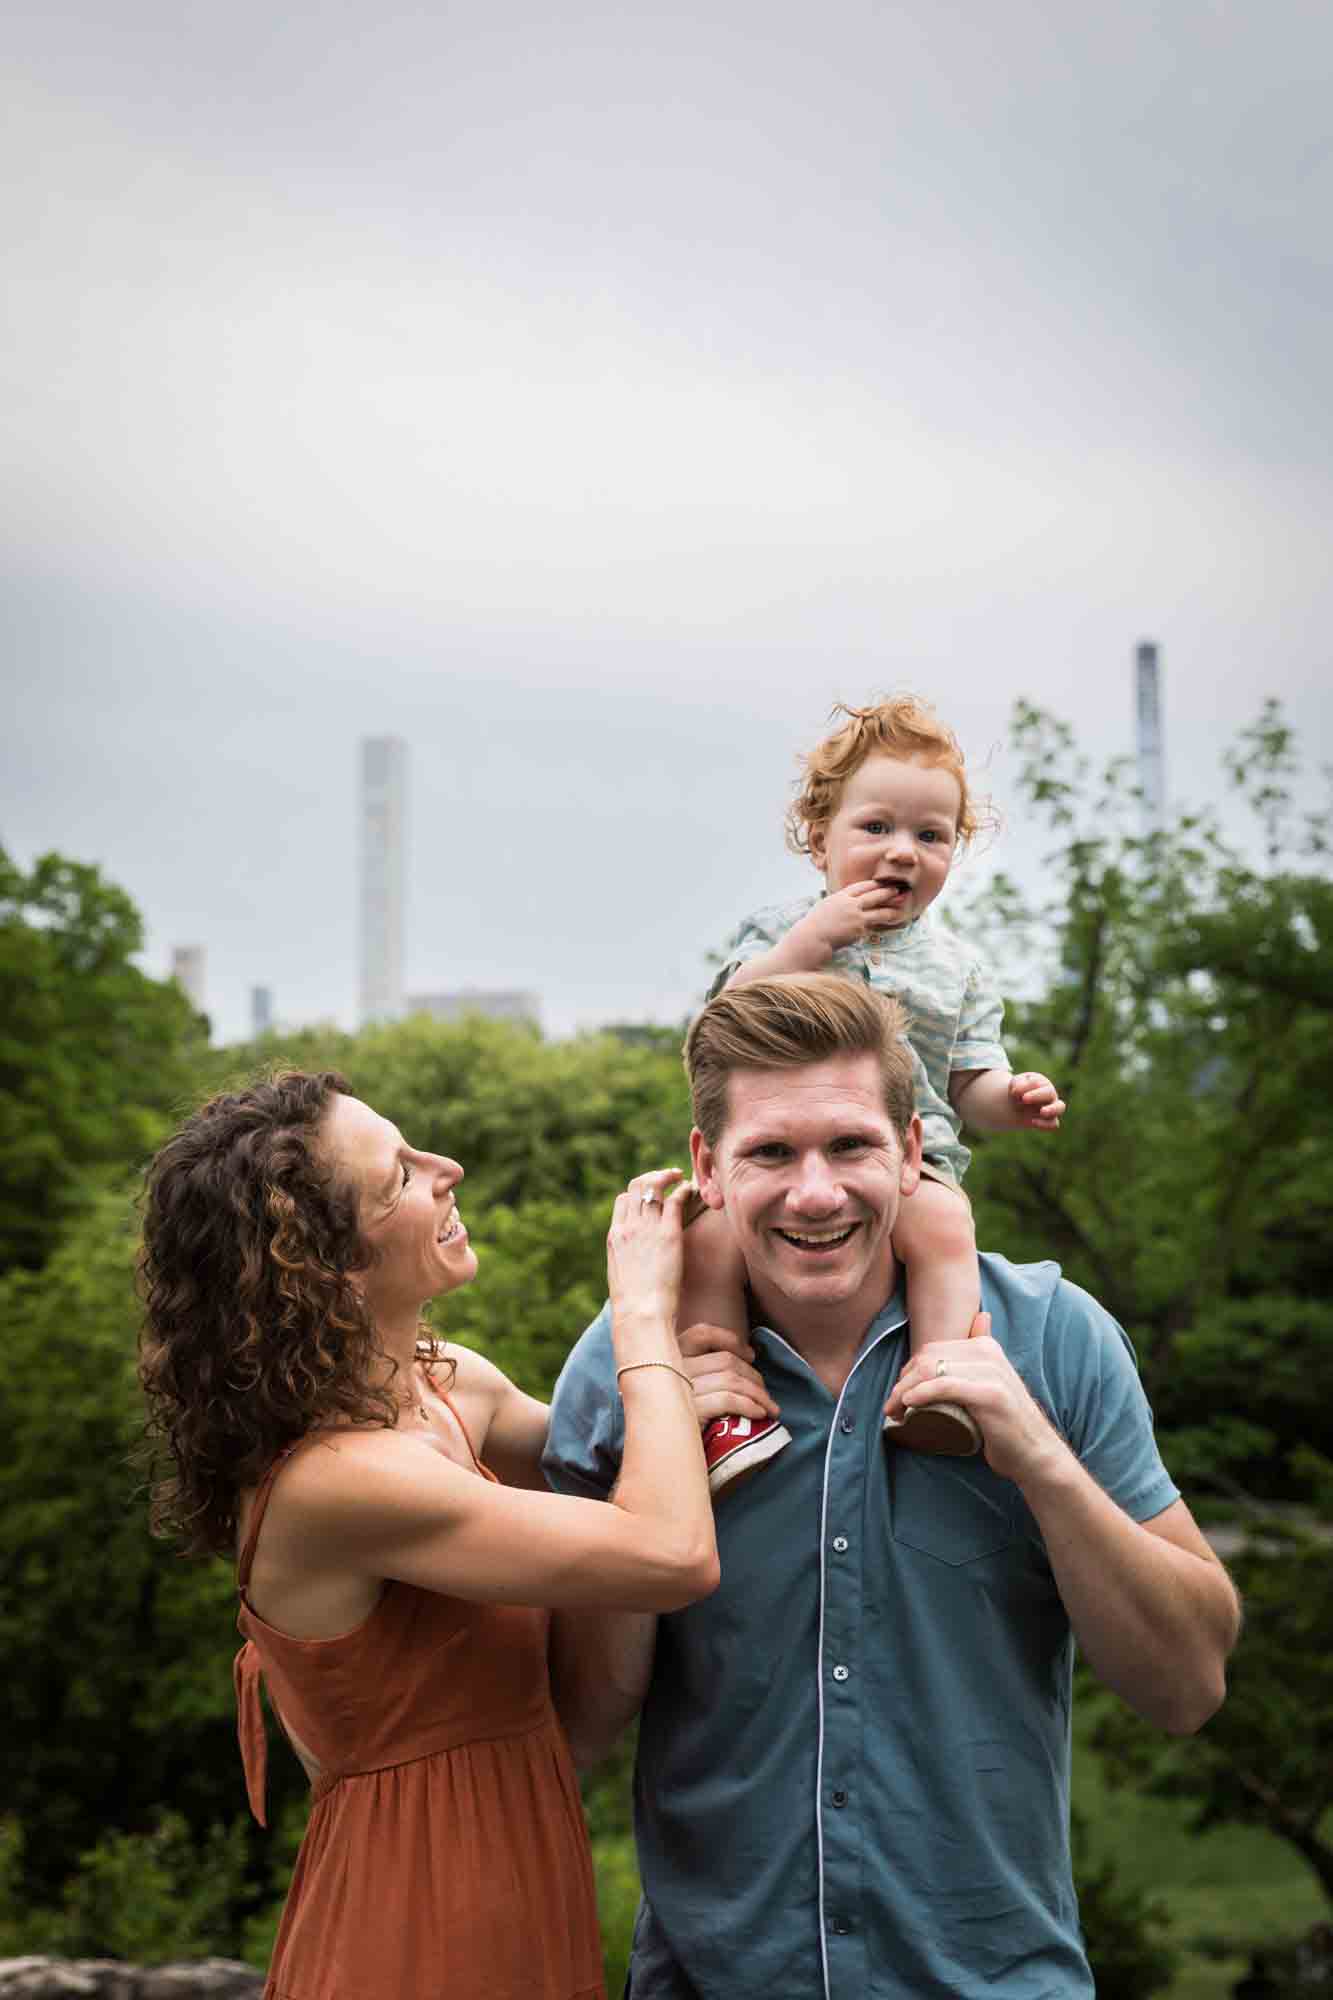 Mother and father playing with red-haired baby boy held on father's shoulders during a Central Park family portrait session